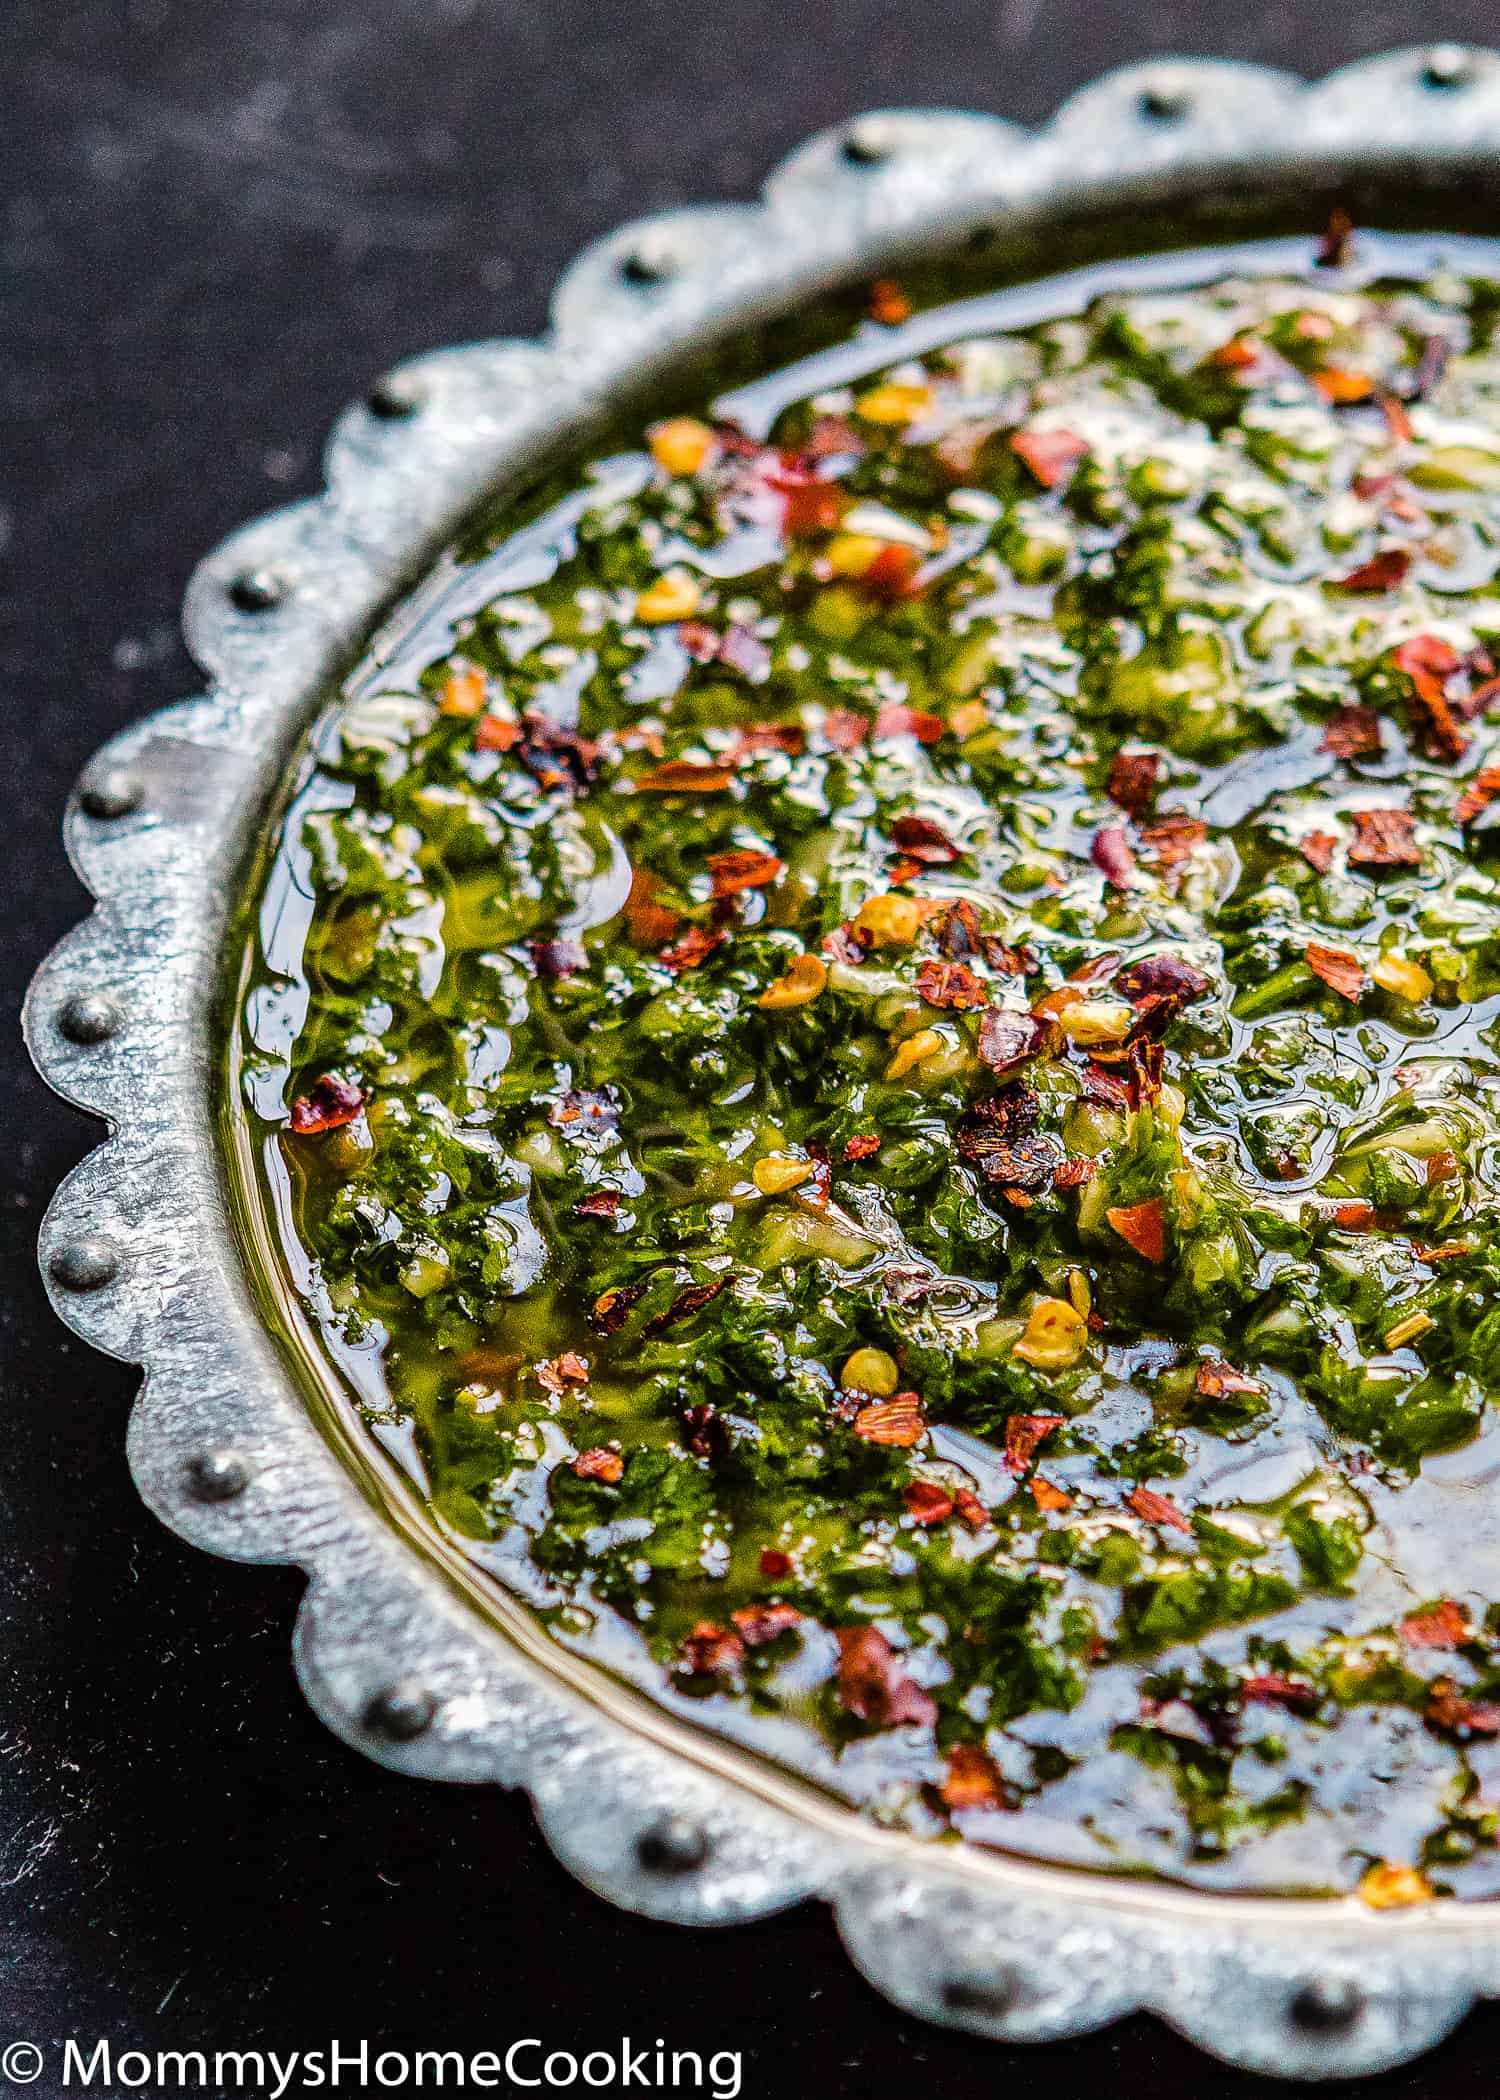 Chimichurri Sauce on a plate.